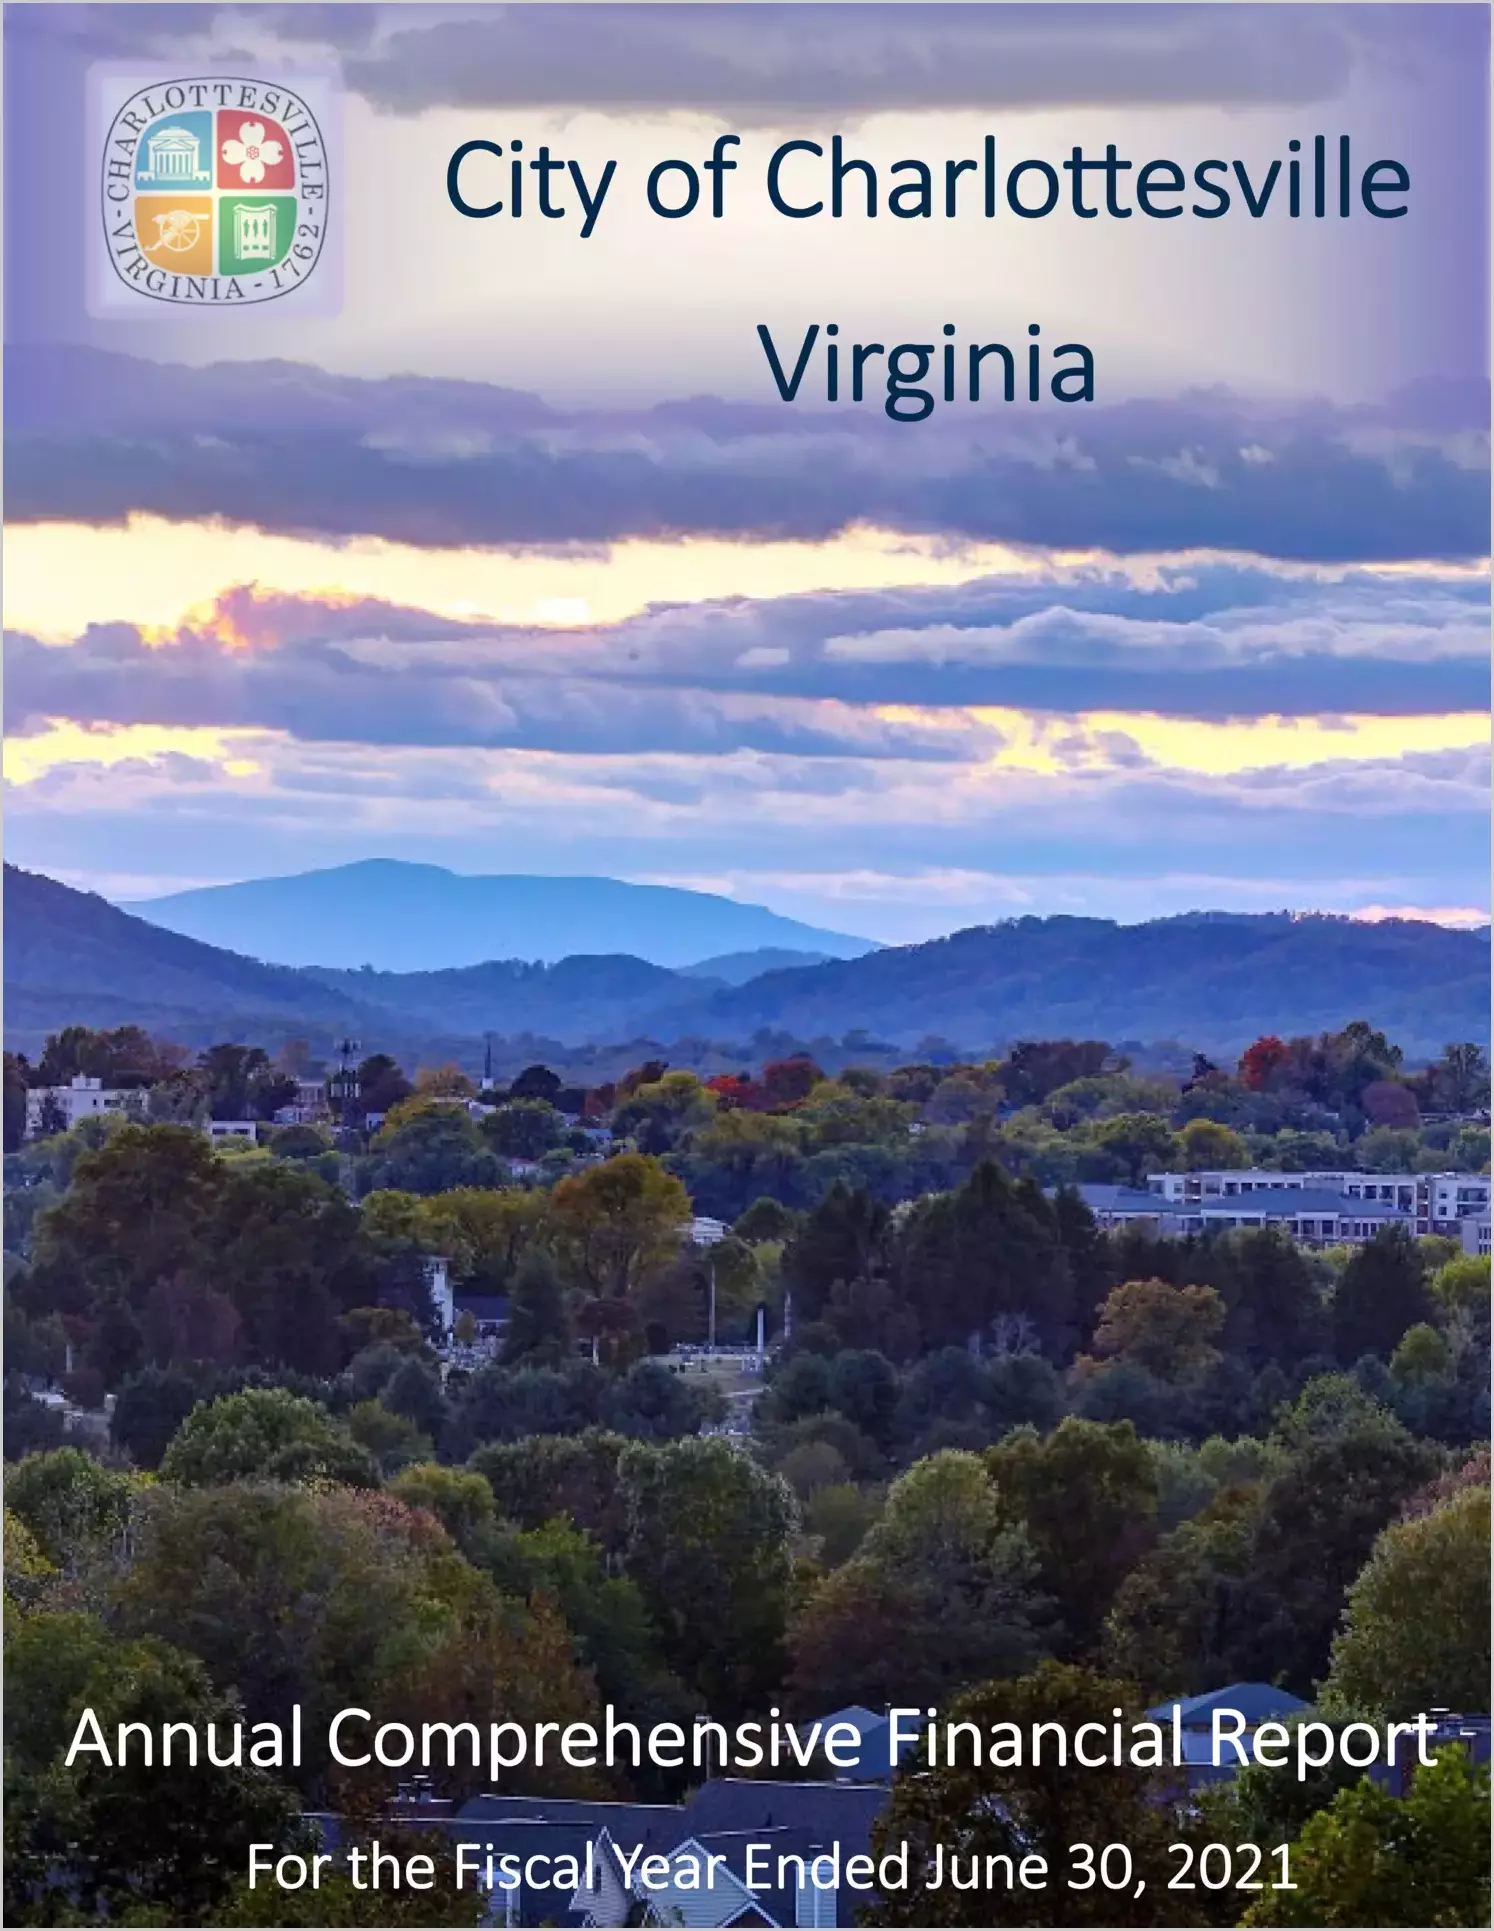 2021 Annual Financial Report for City of Charlottesville